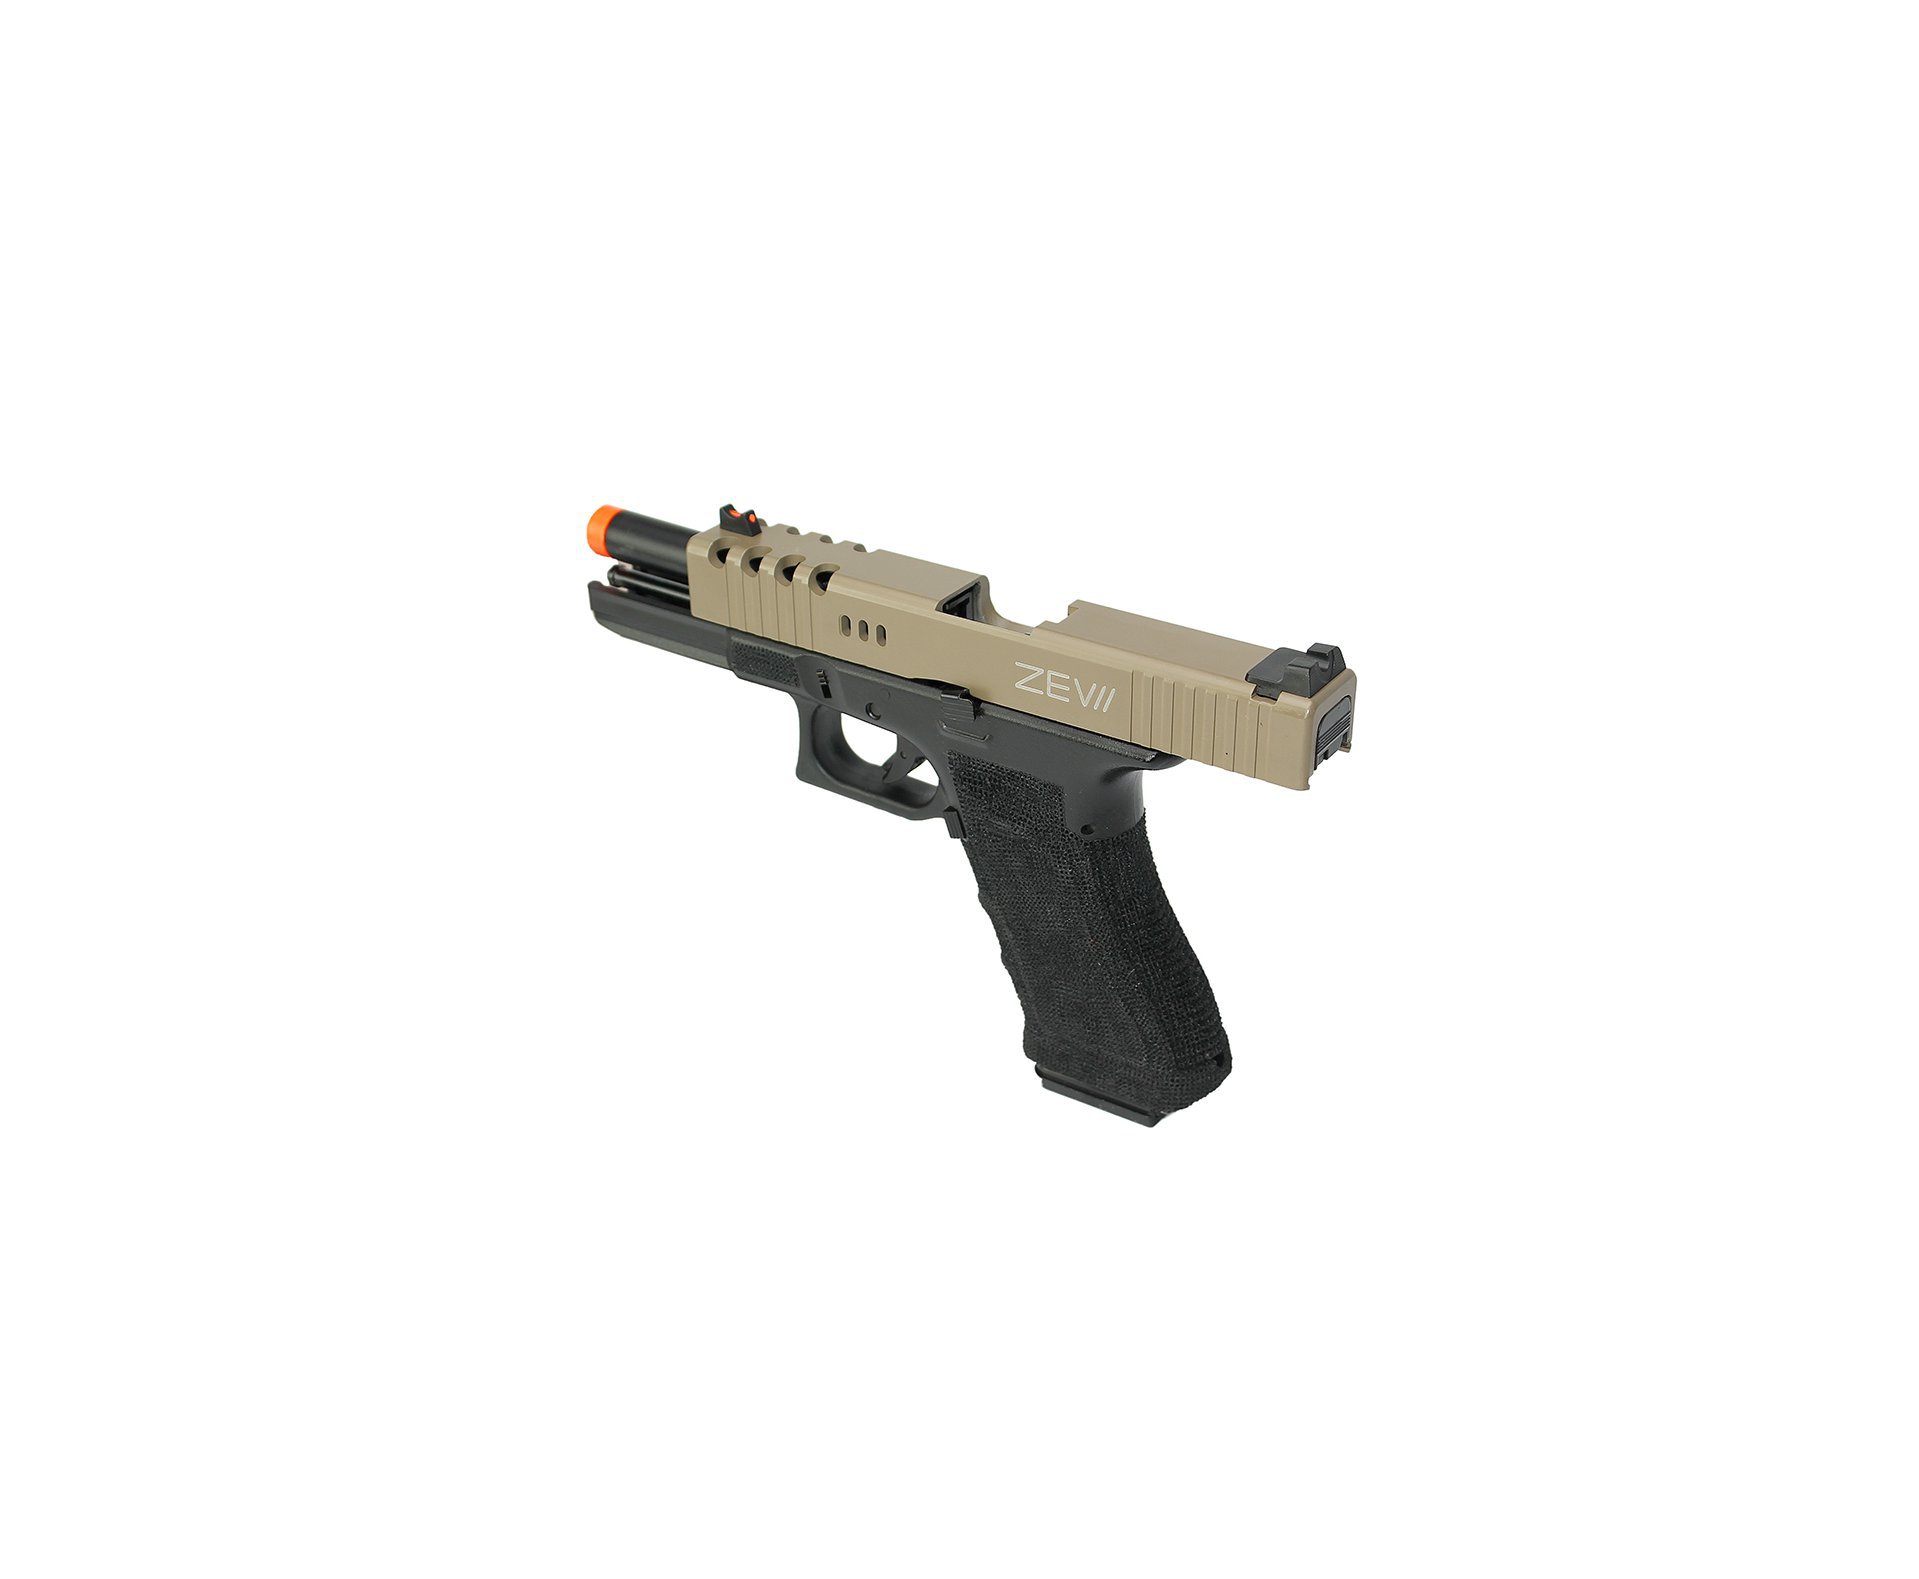 Pistola Airsoft Green Gas Gbb G17 Blowback Db758 Tan 6,0mm - Double Bell